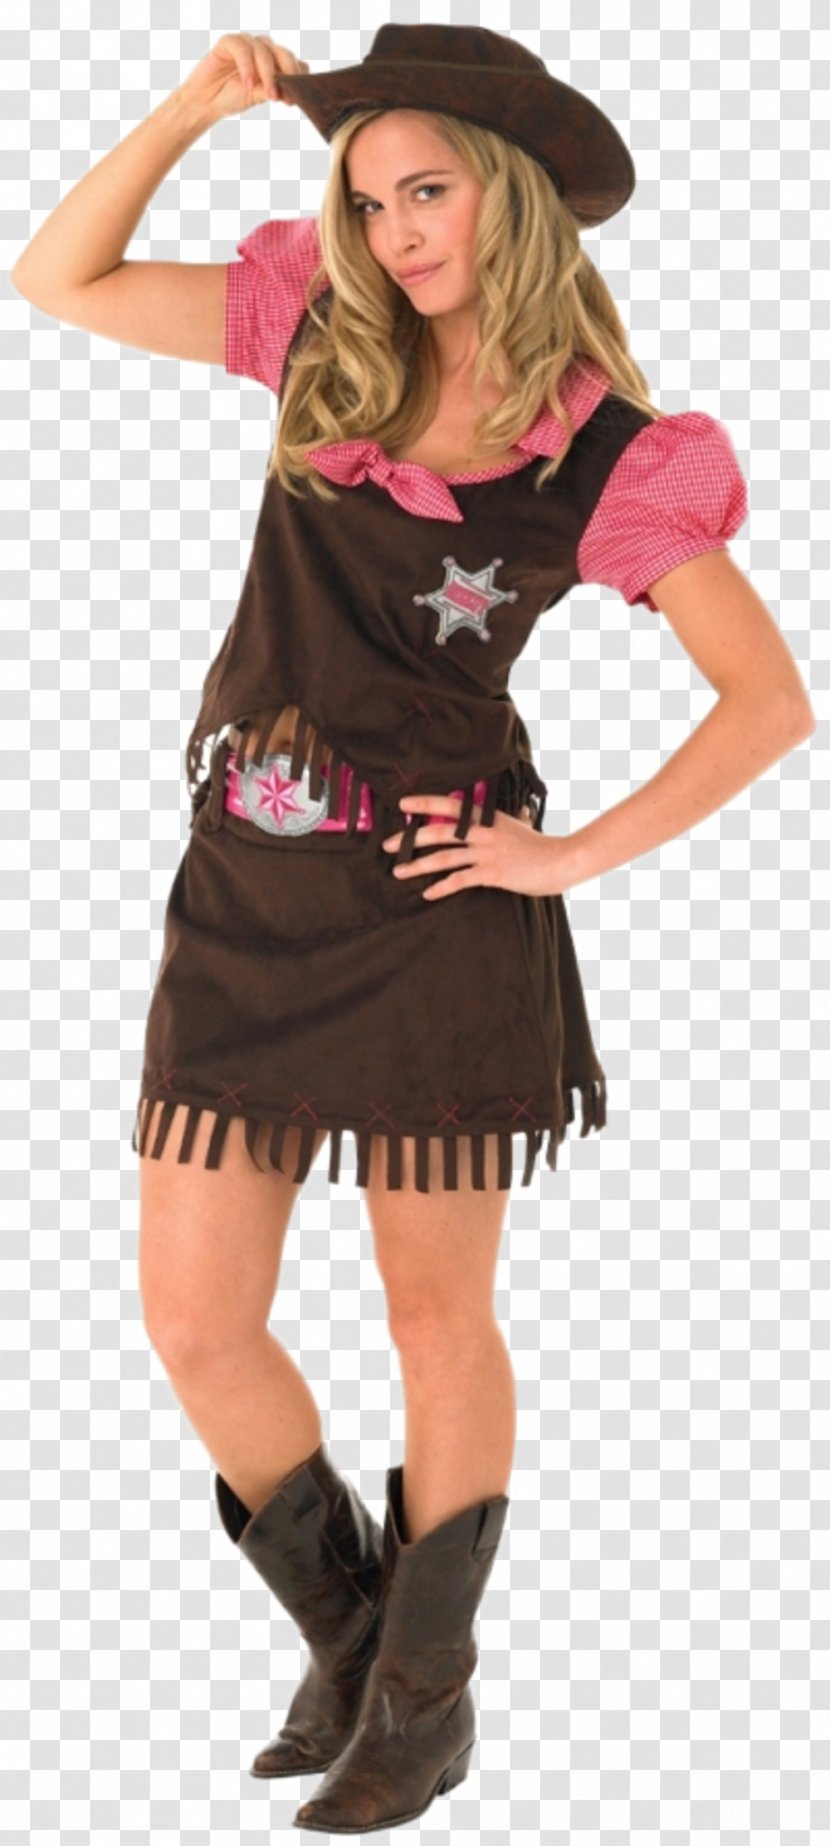 American Frontier Costume Party Cowboy Dress - Adult Transparent PNG